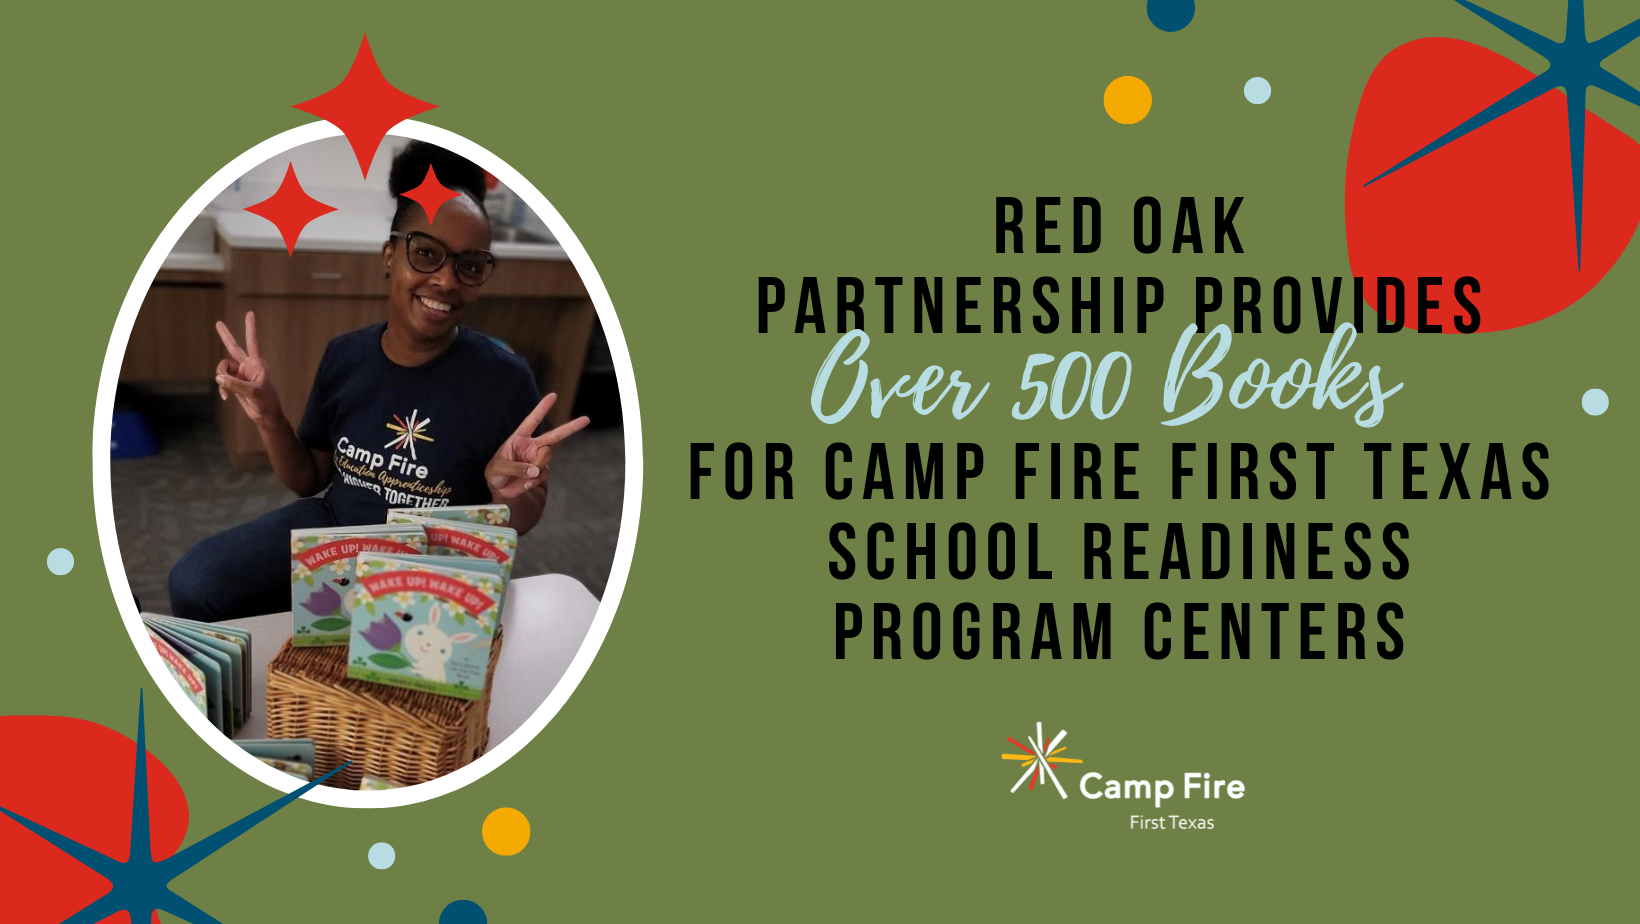 Red Oak Partnership Provides Over 500 Books for Camp Fire First Texas School Readiness Program Centers, a Camp Fire First Texas blog